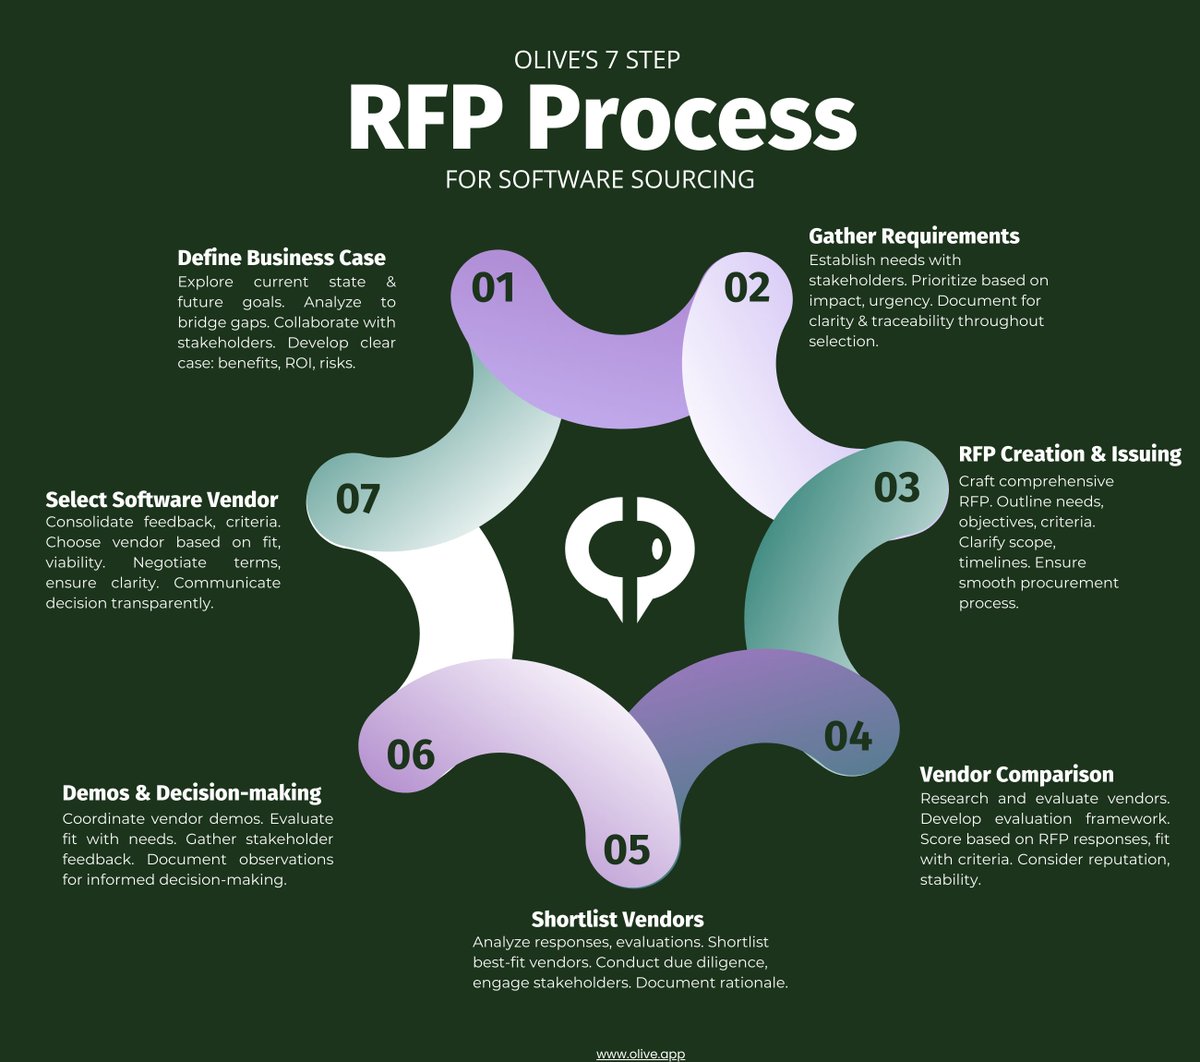 Feeling like you're stuck in an RFP time loop? 🌀 Break free from the cycle and revolutionize your #SoftwareSourcing journey with a new approach. 

Discover how to navigate the maze of procurement with @Olive.

hubs.li/Q02rzKMJ0
#Sourcing #RFP #Software #Procurement